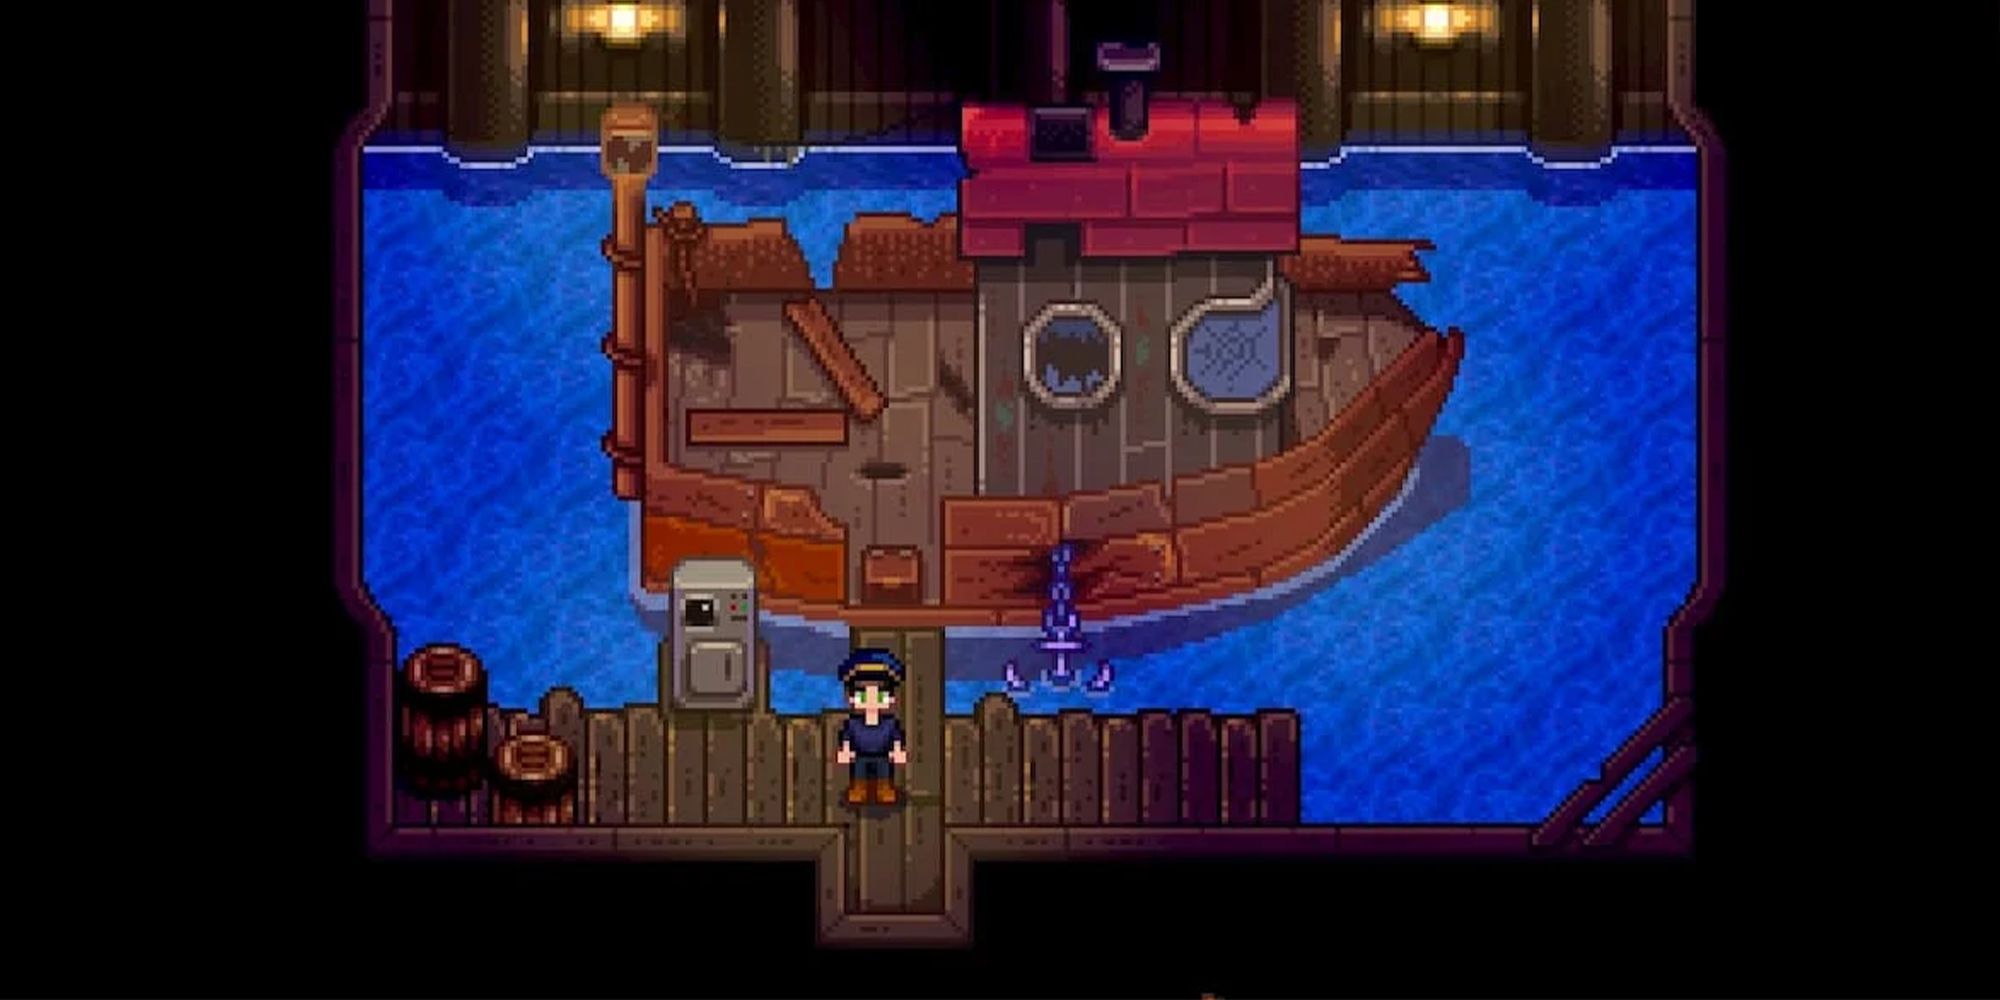 Willy's boat that takes players to the Ginger Island in Stardew Valley